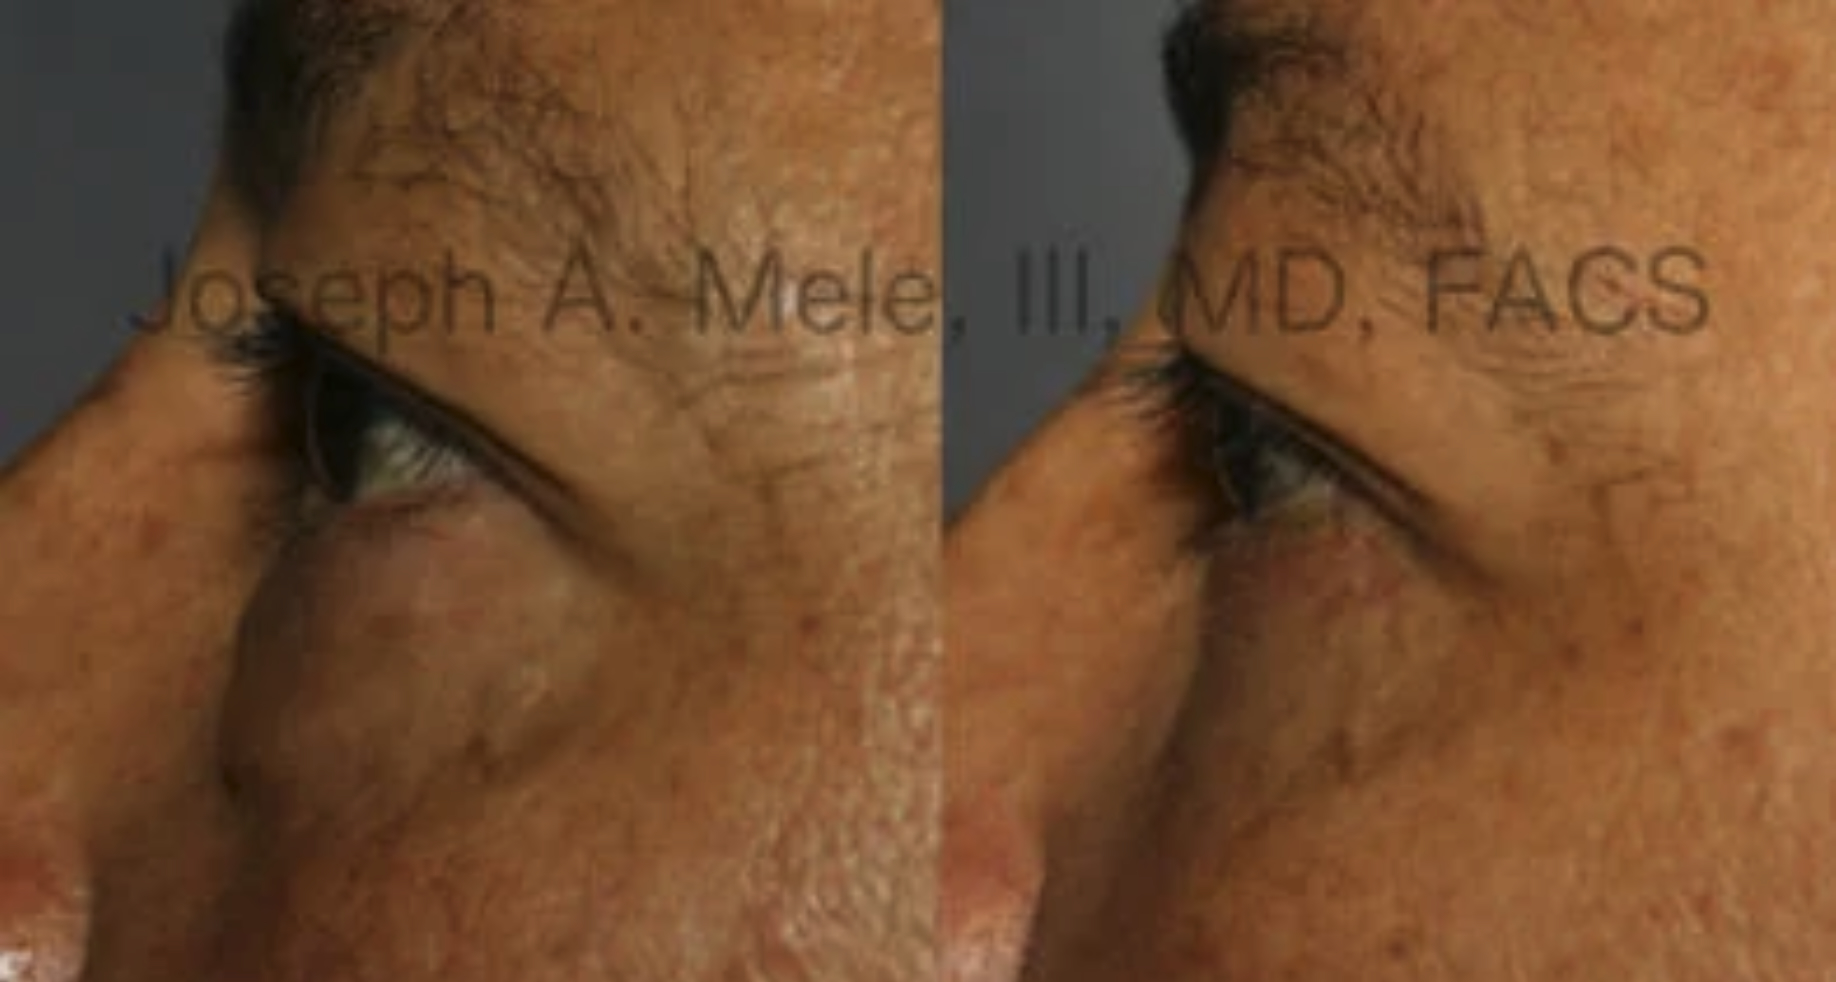 Lower eyelid lift before and after photos - lower blepharoplasty SF Bay Area